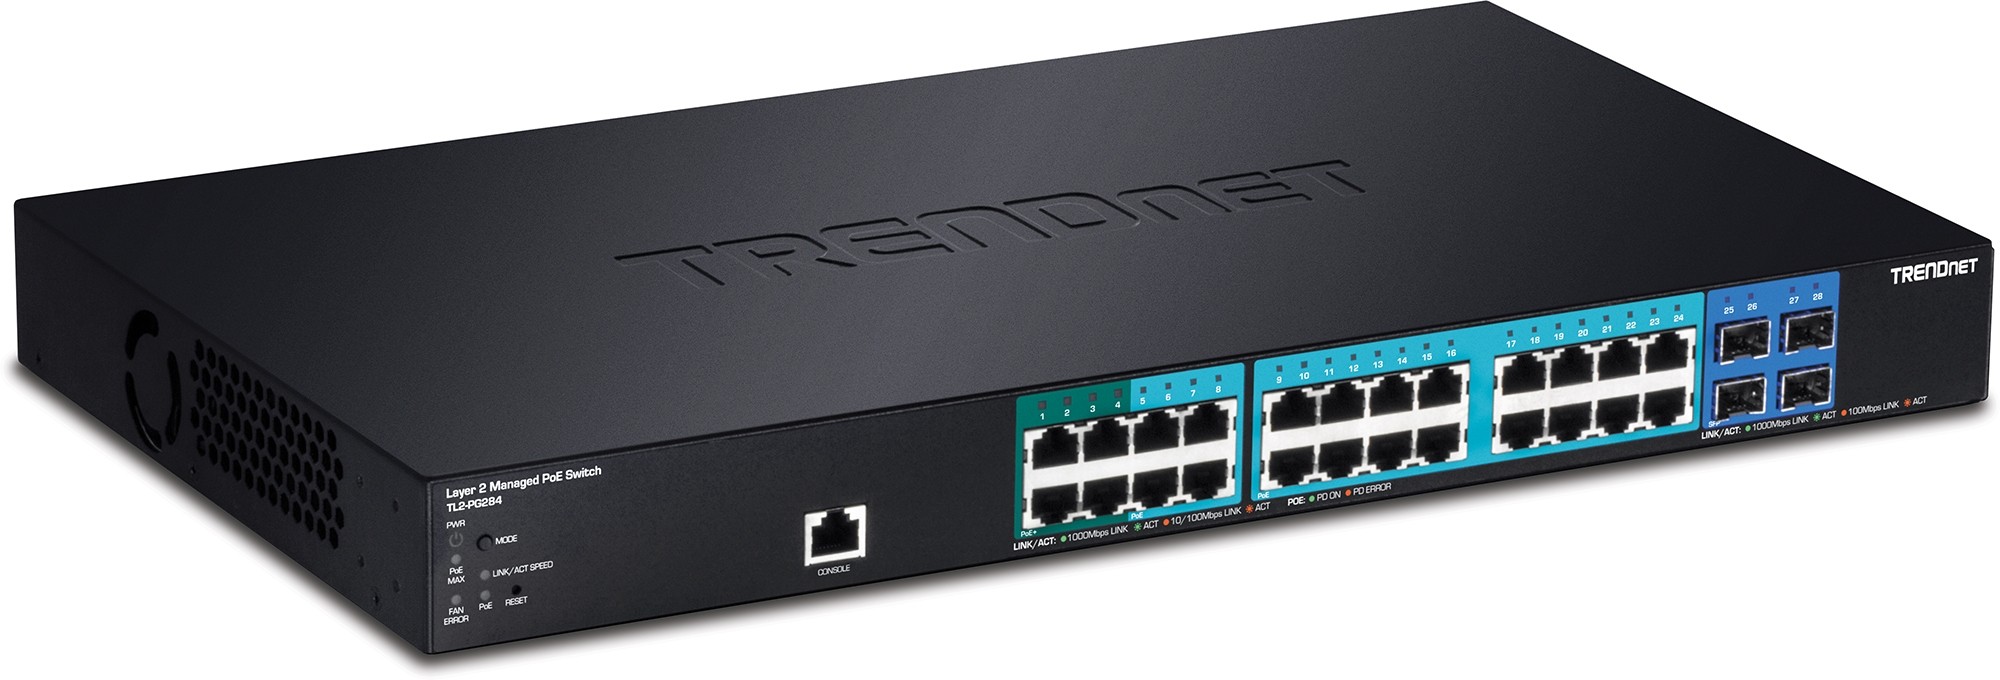 TRENDnet 28-port Gigabit POE+ Managed Layer 2 Switch with 4 shared SFP slots TL2-PG284